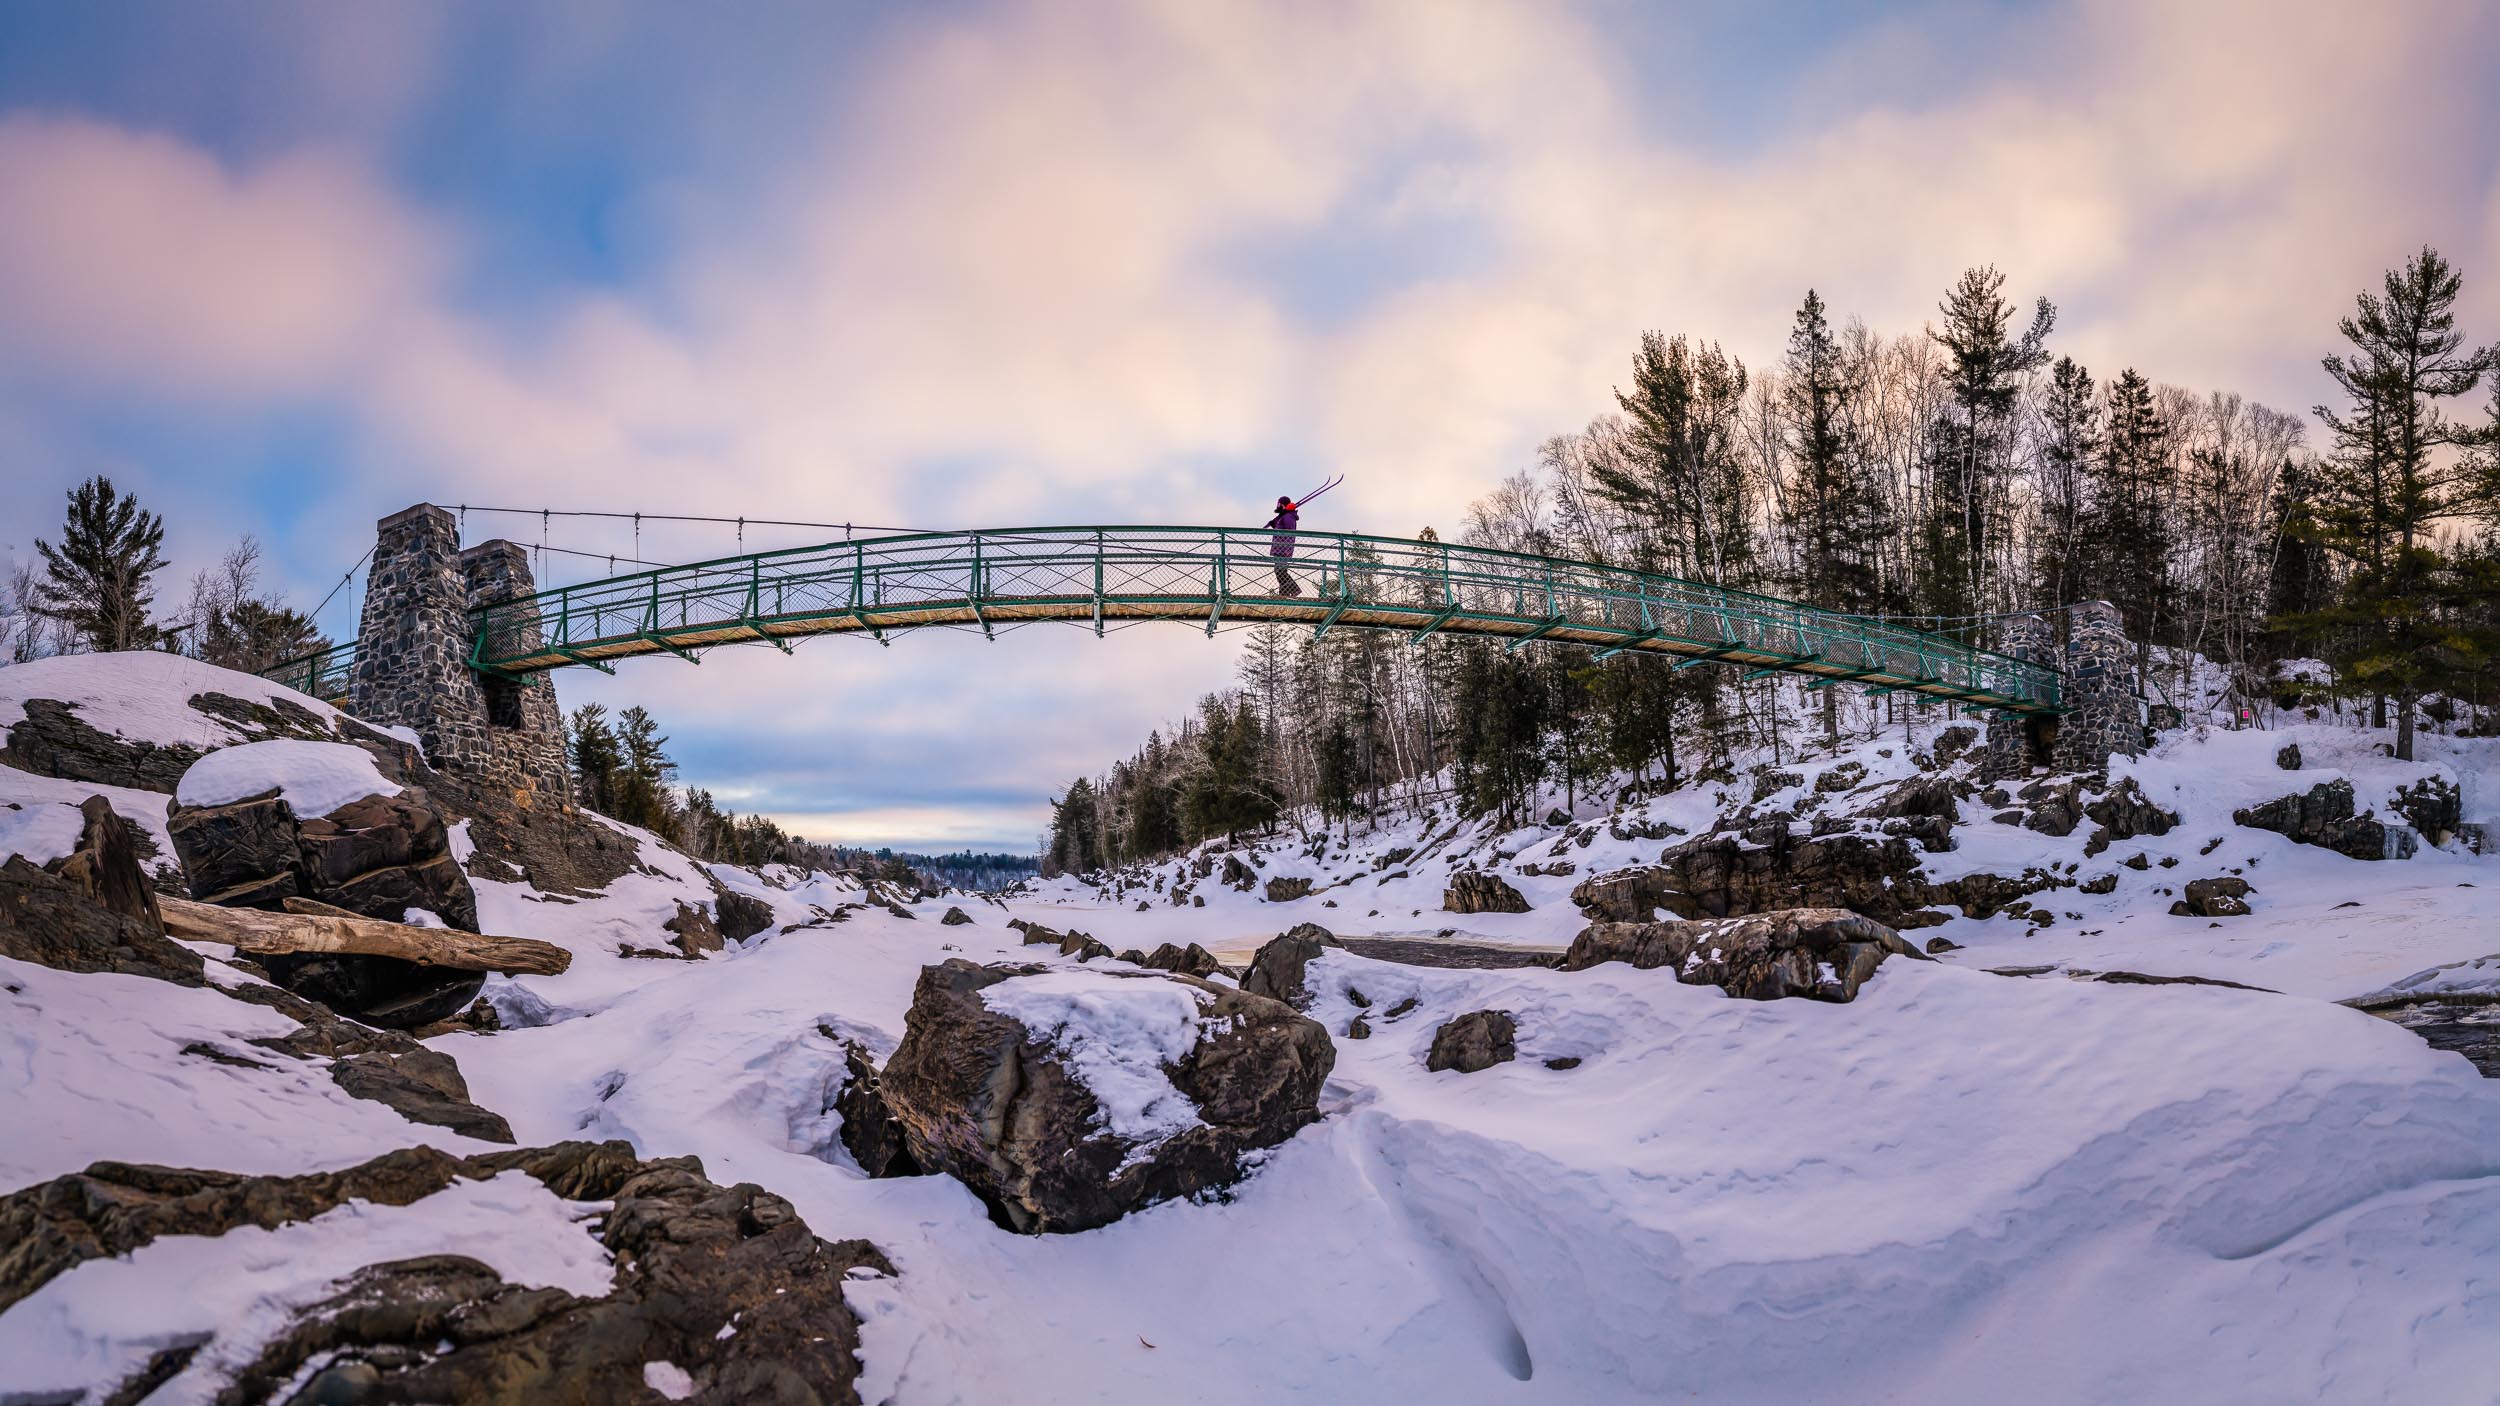 Crossing the Swinging Bridge in Jay Cooke State Park, Minnesota, on a frigid morning looking for sunrise and good skiing.